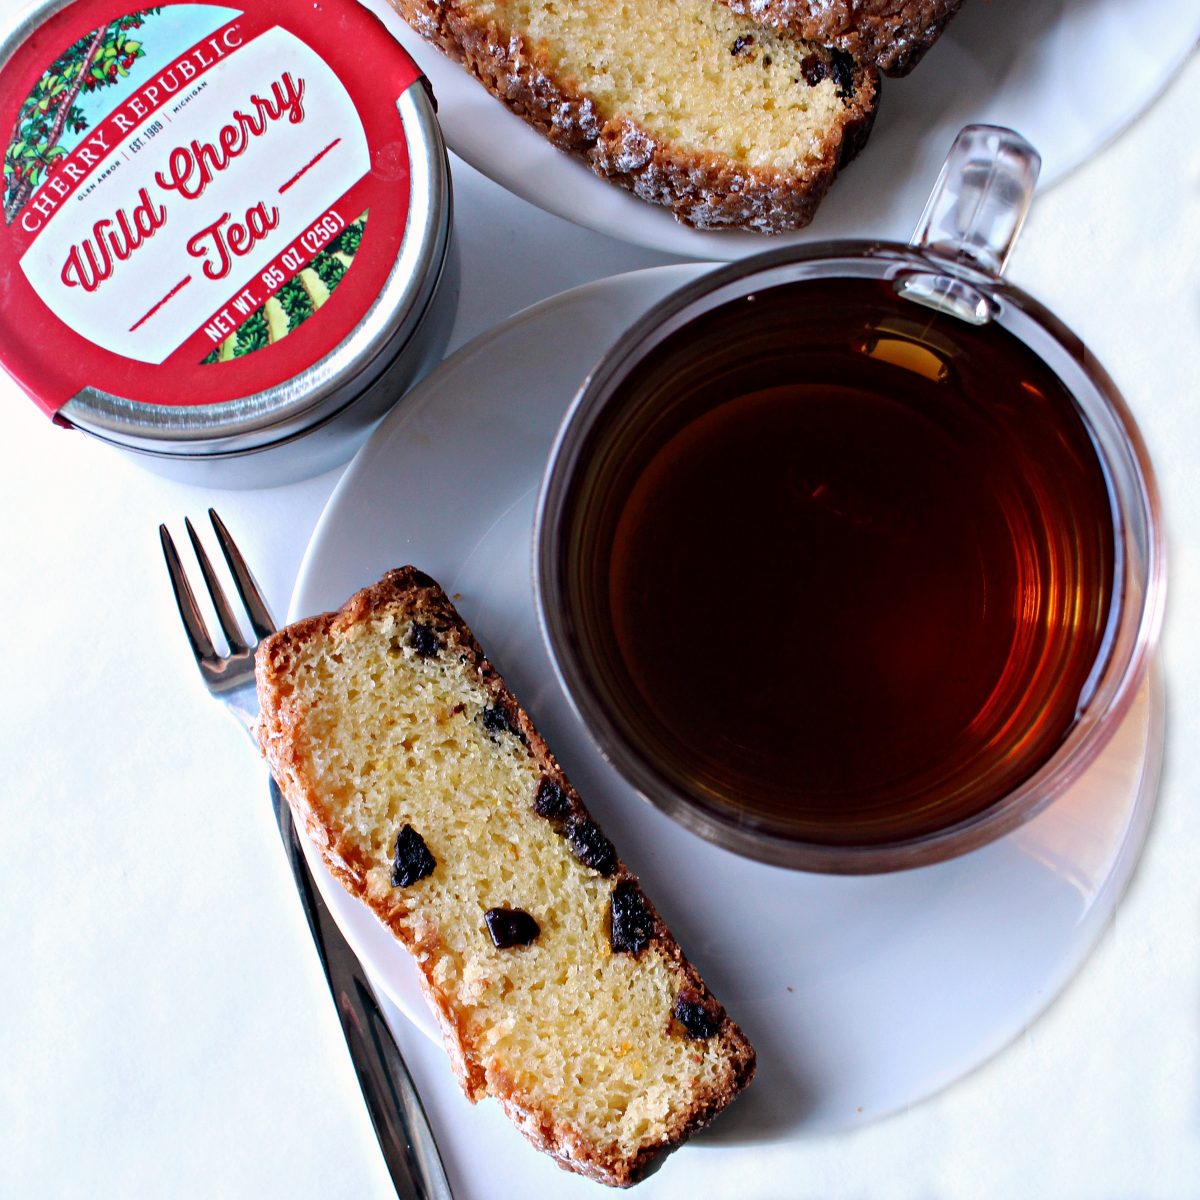 Cup of tea on a saucer with a slice of cake and a tin of cherry tea.